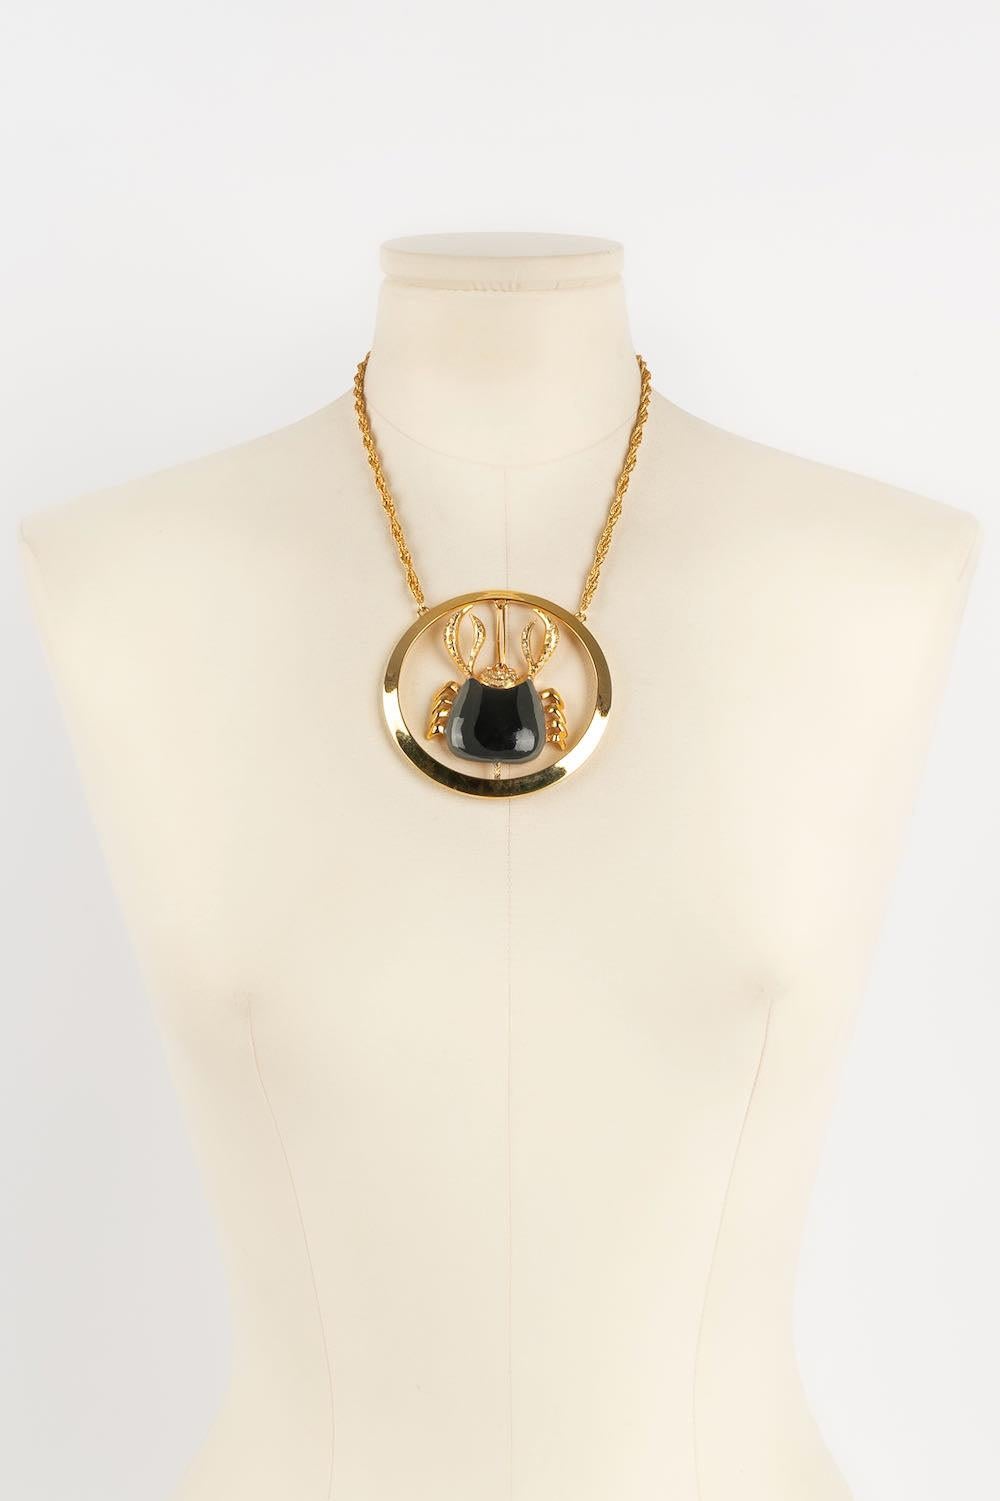 Pierre Cardin -Golden metal, rhinestone and enamel necklace.

Additional information: 

Dimensions: 
Length: 44 cm

Condition: 
Very good condition

Seller Ref number: BC1